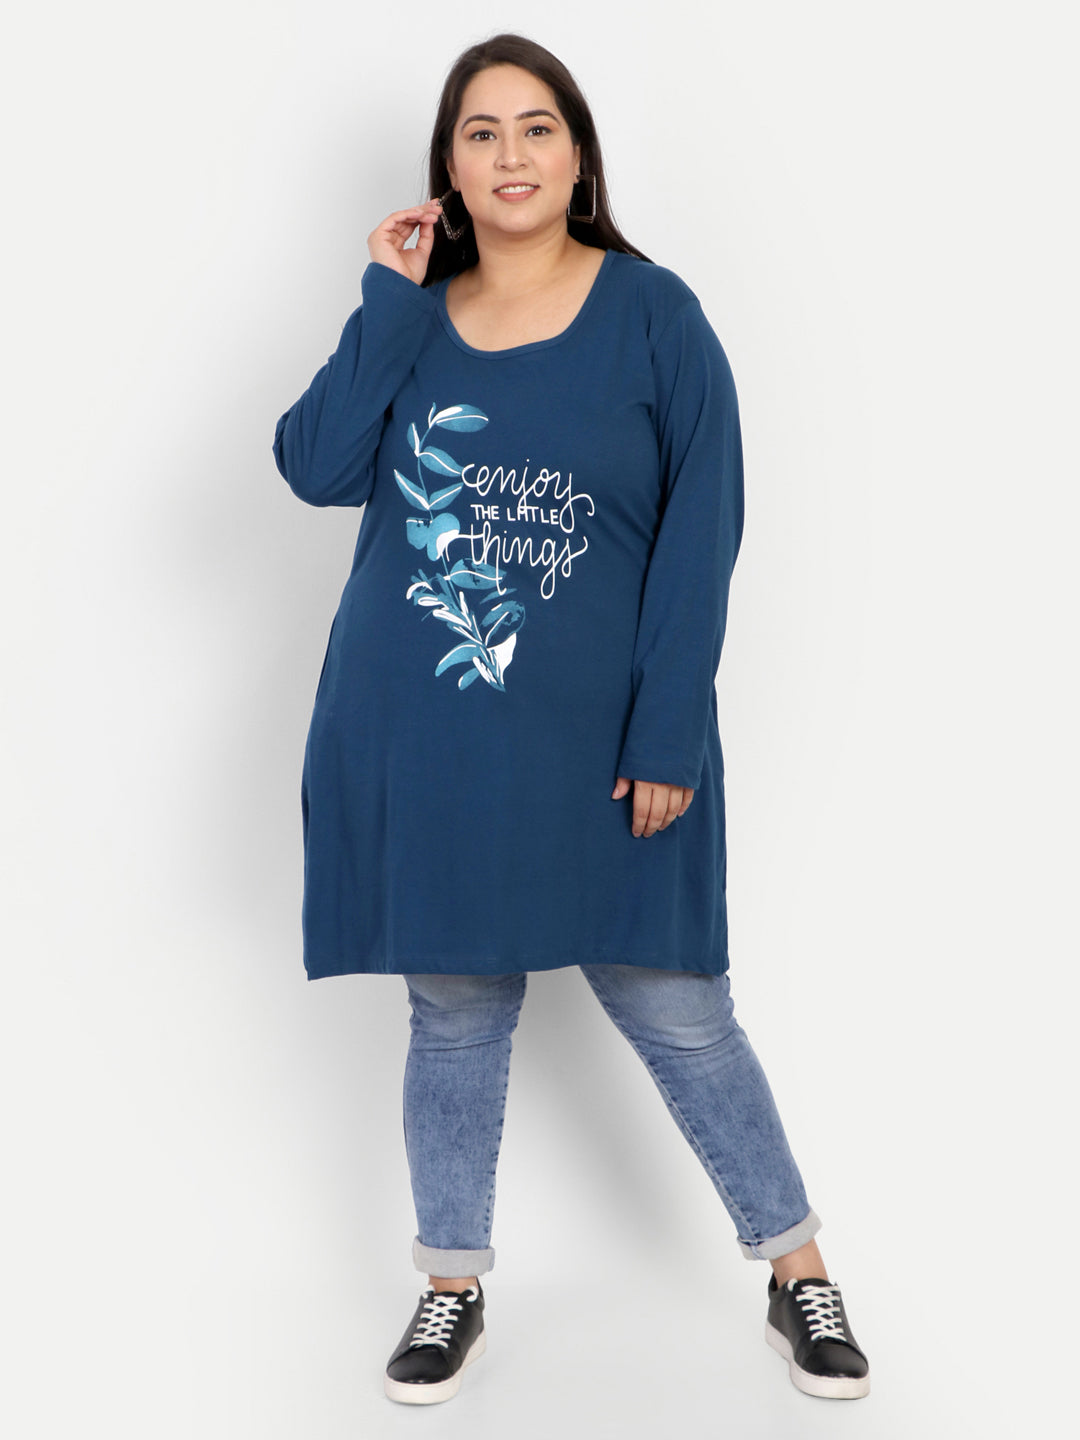 Buy Comfortable Full Sleeves Plus Size Cotton Long Top For Women